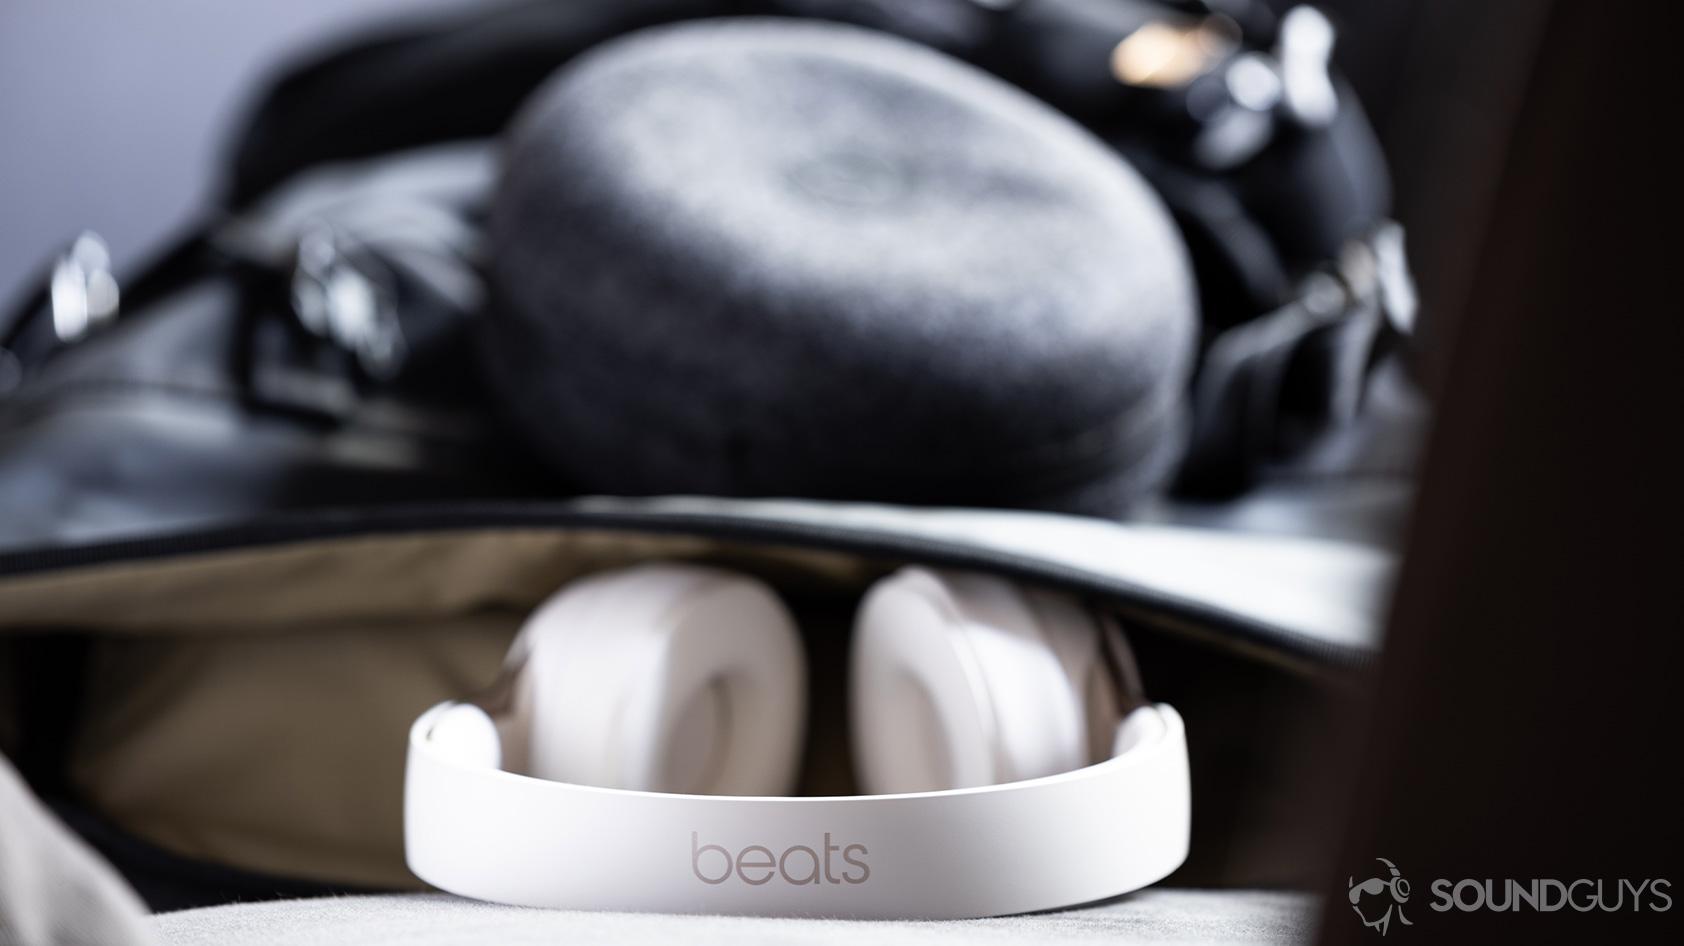 Apple drops Bose from retail to sell own headphones, and more tech news today